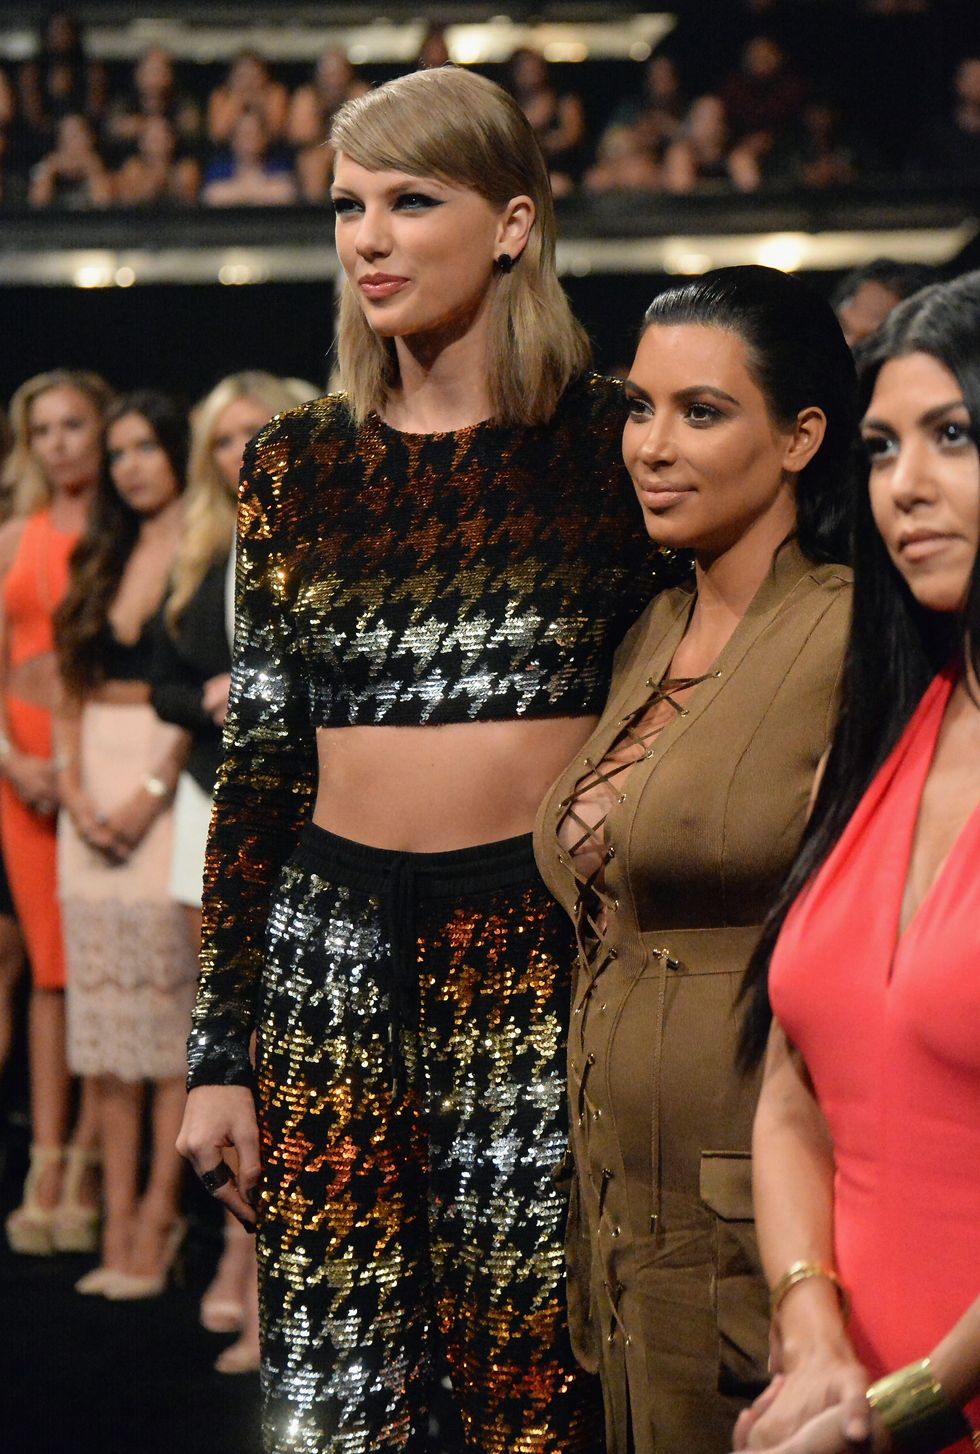 taylor-swift-is-reportedly-still-waiting-on-apology-from-kim-kardashian-for-snapchat-scandal